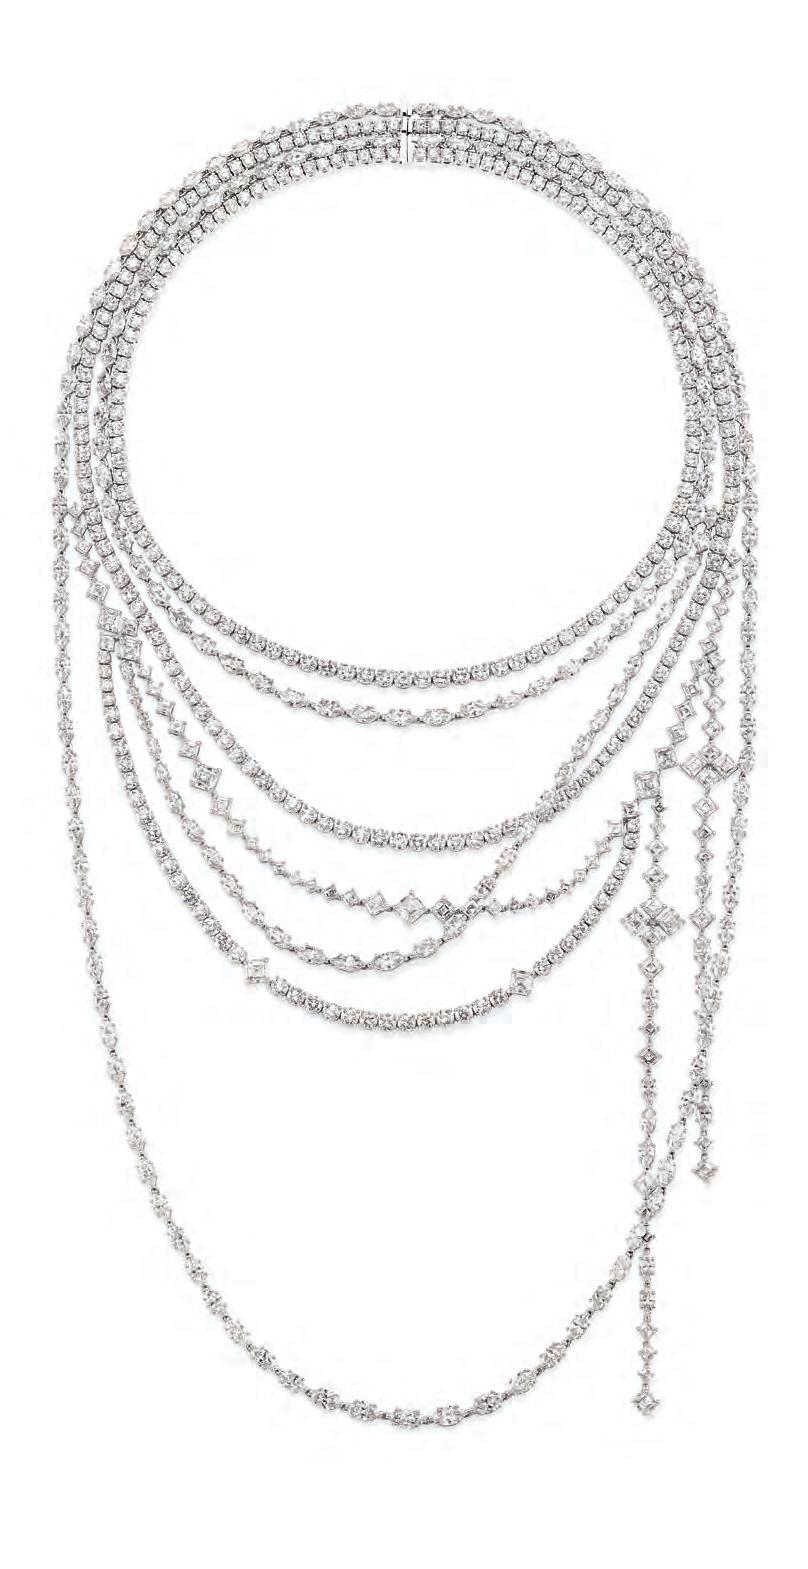 Detachable strands of fancy-cut diamonds assemble beautifully to create varied necklaces from the Secret Combination by Harry Winston. different styles, observe jewellers.